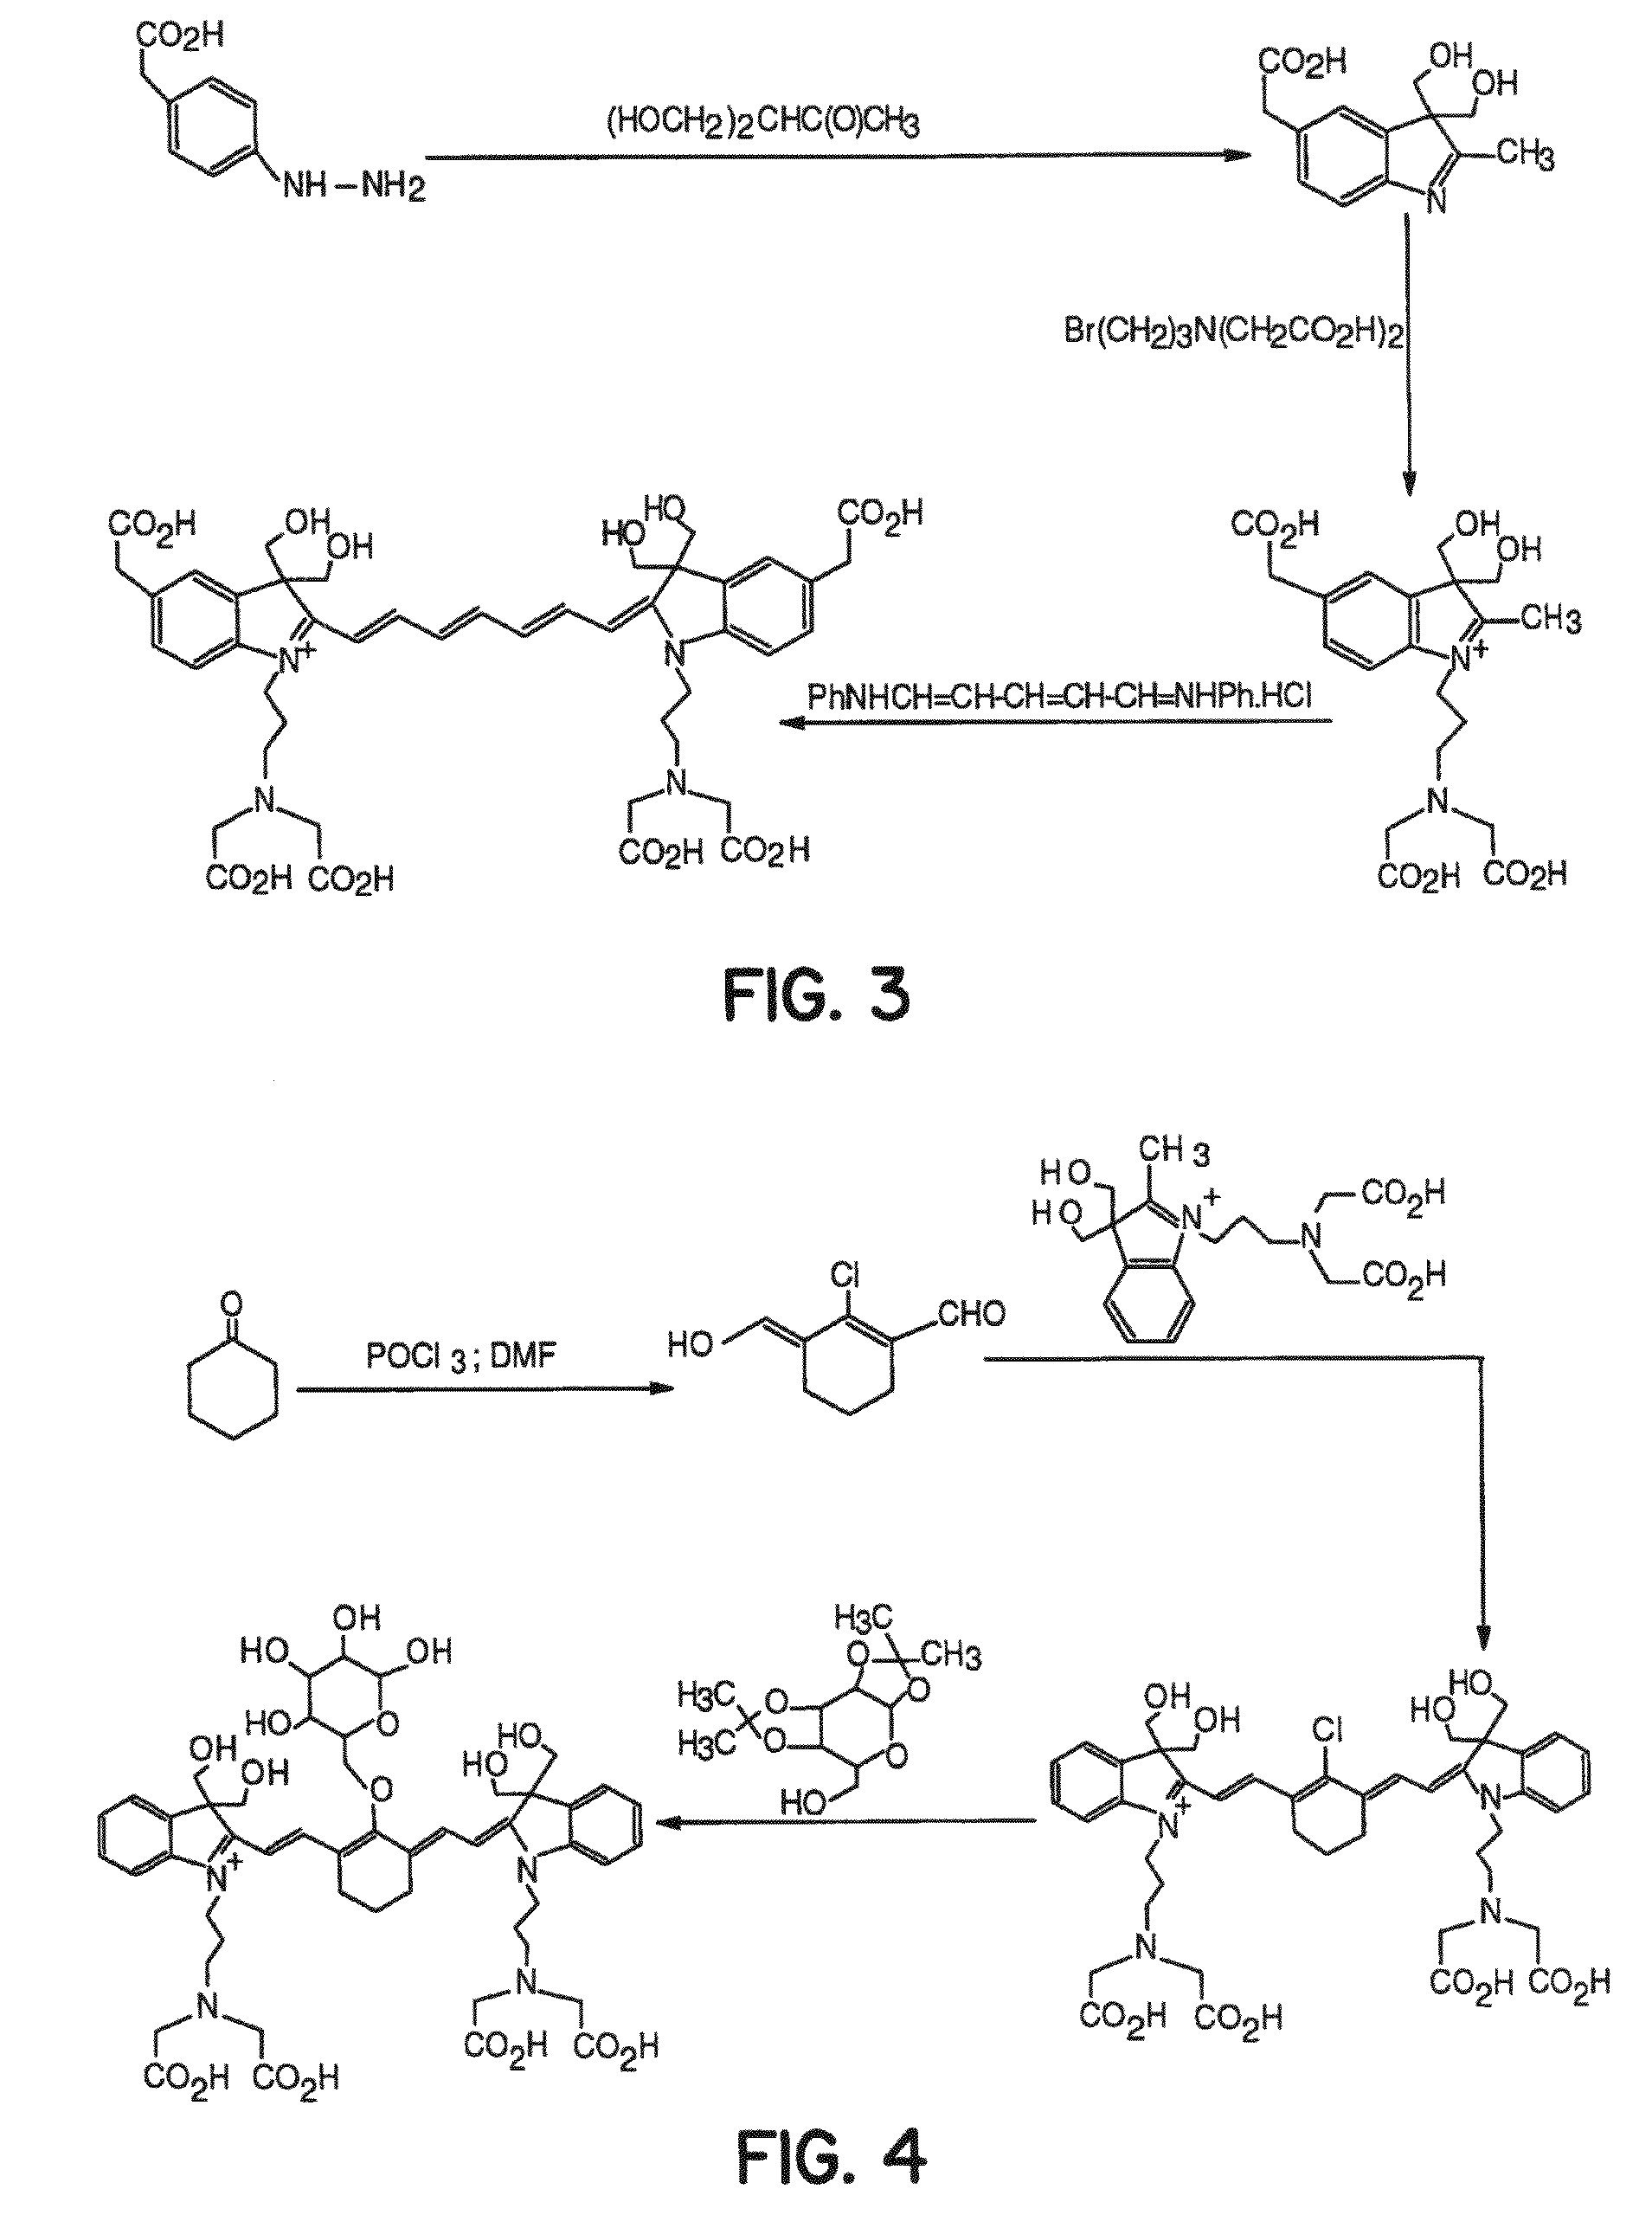 Receptor-avid exogenous optical contrast and therapeutic agents